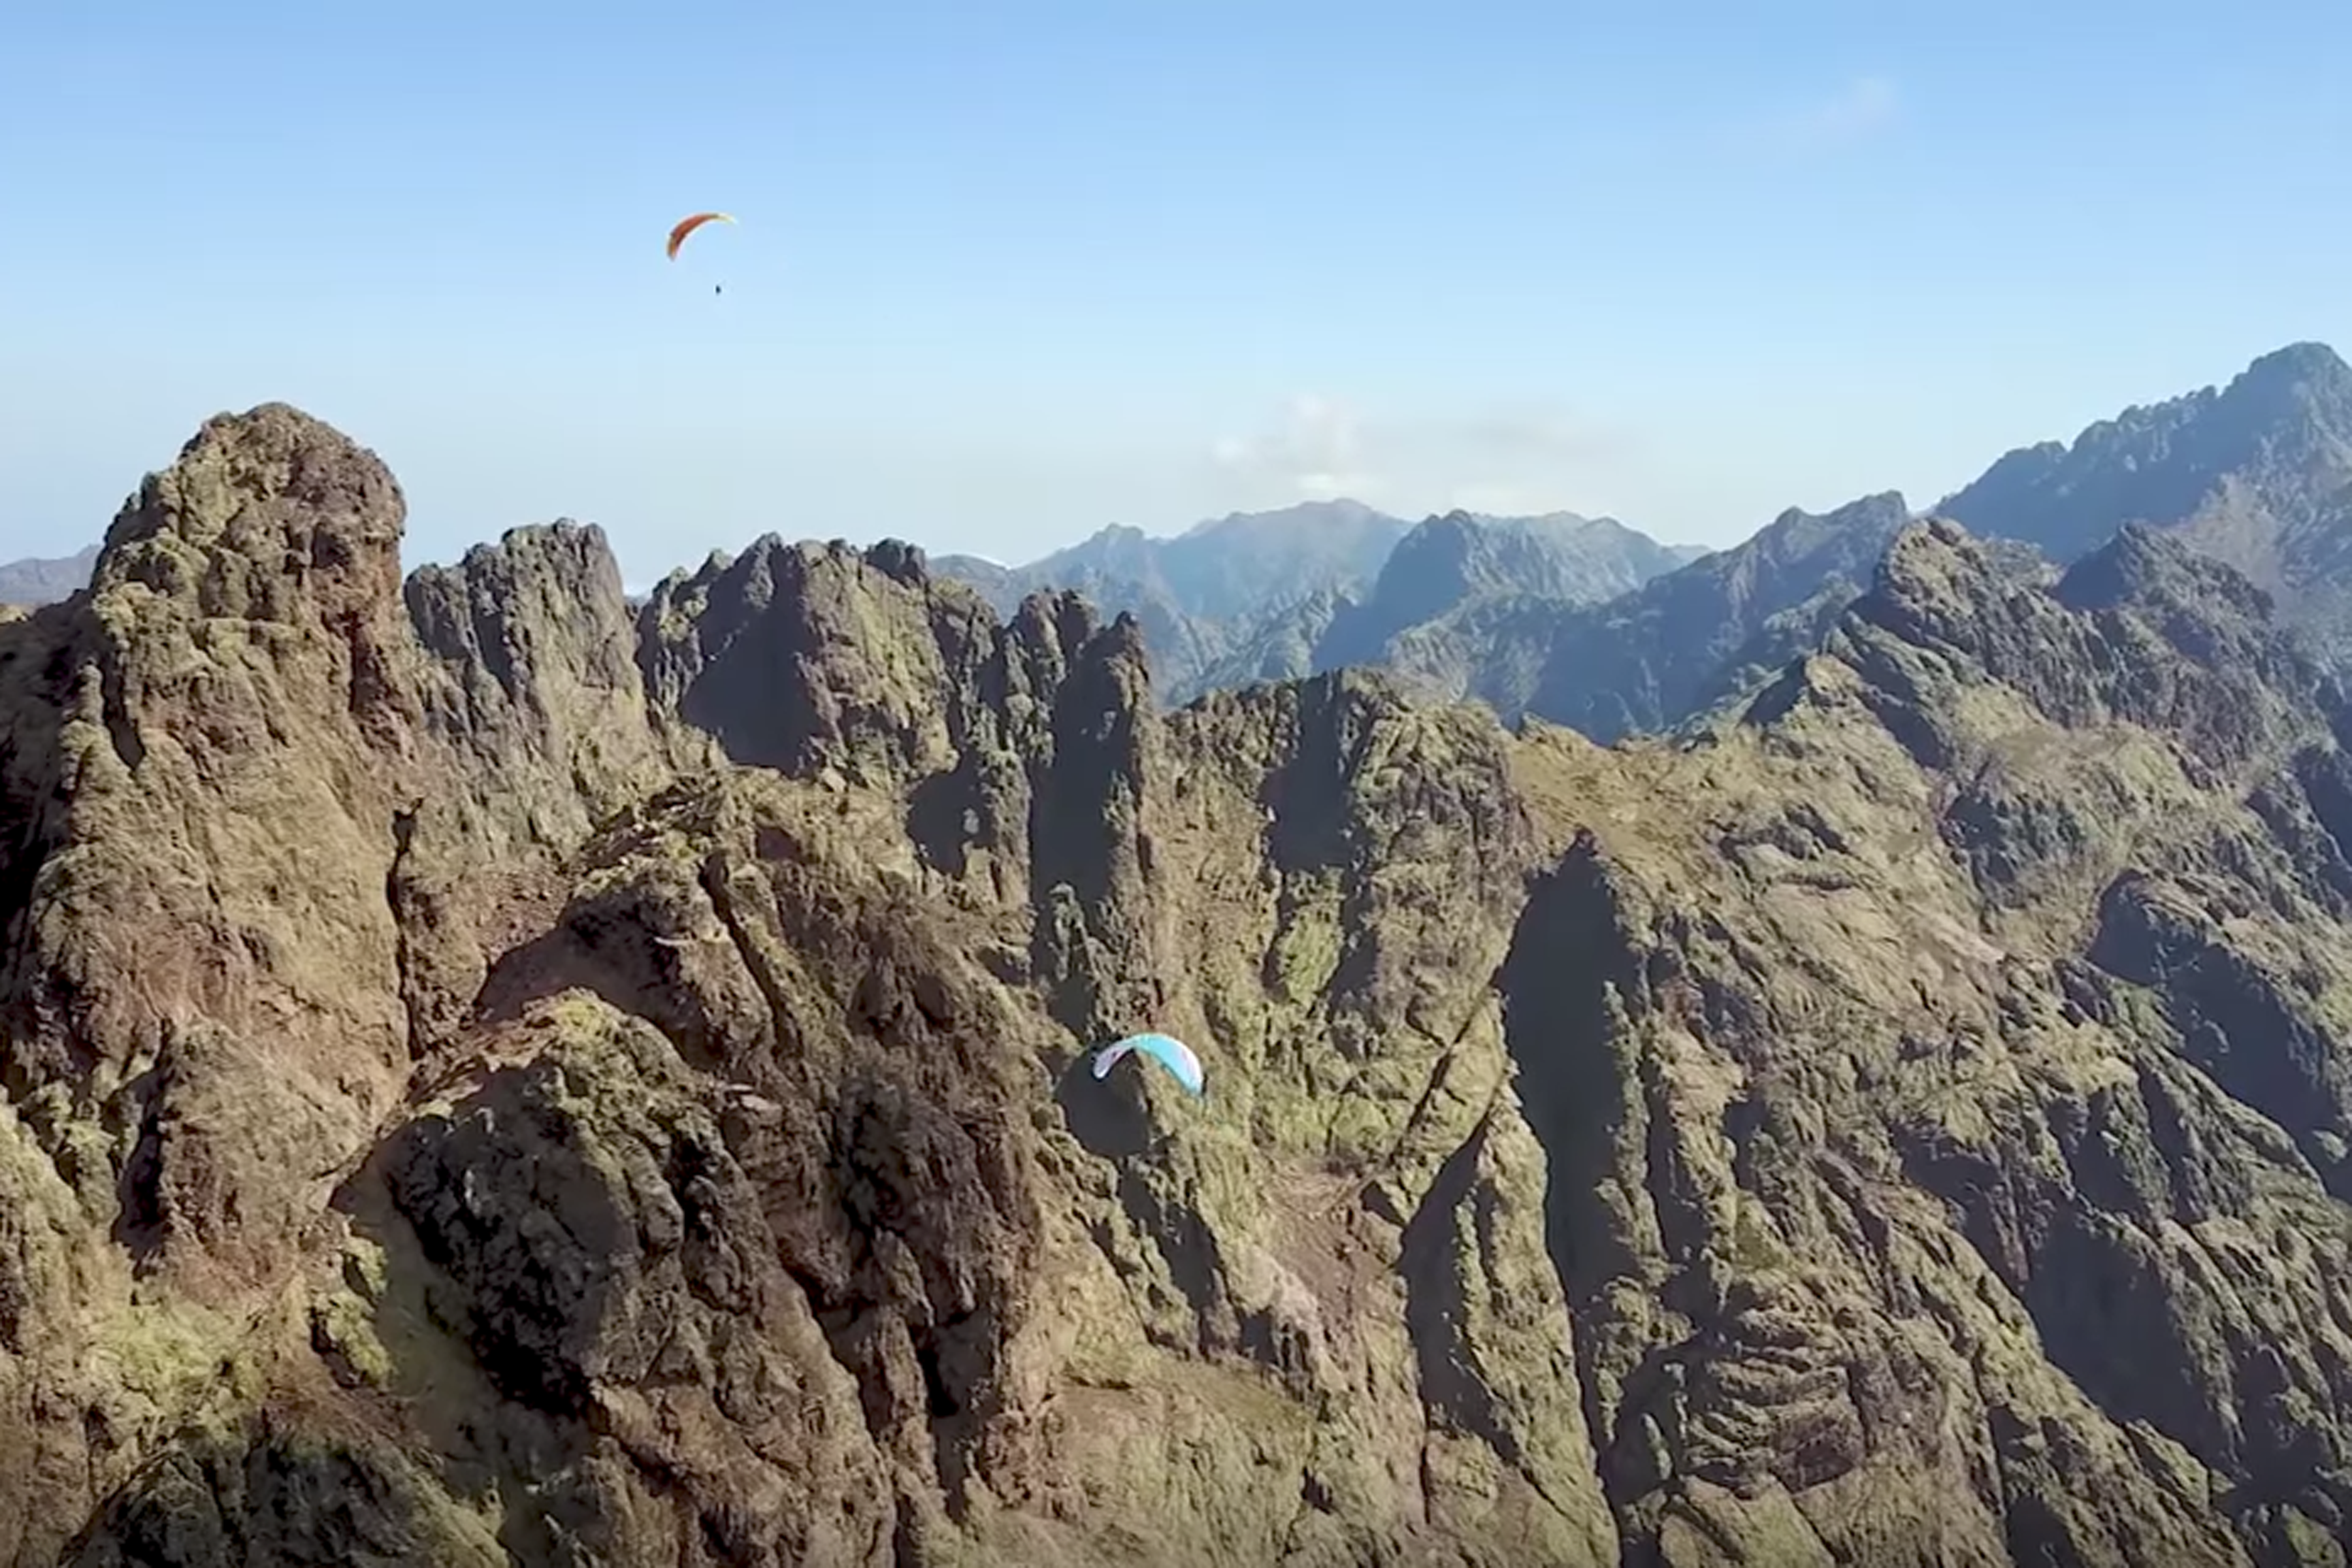 Hiking and paragliding over the GR20 trail in Corsica